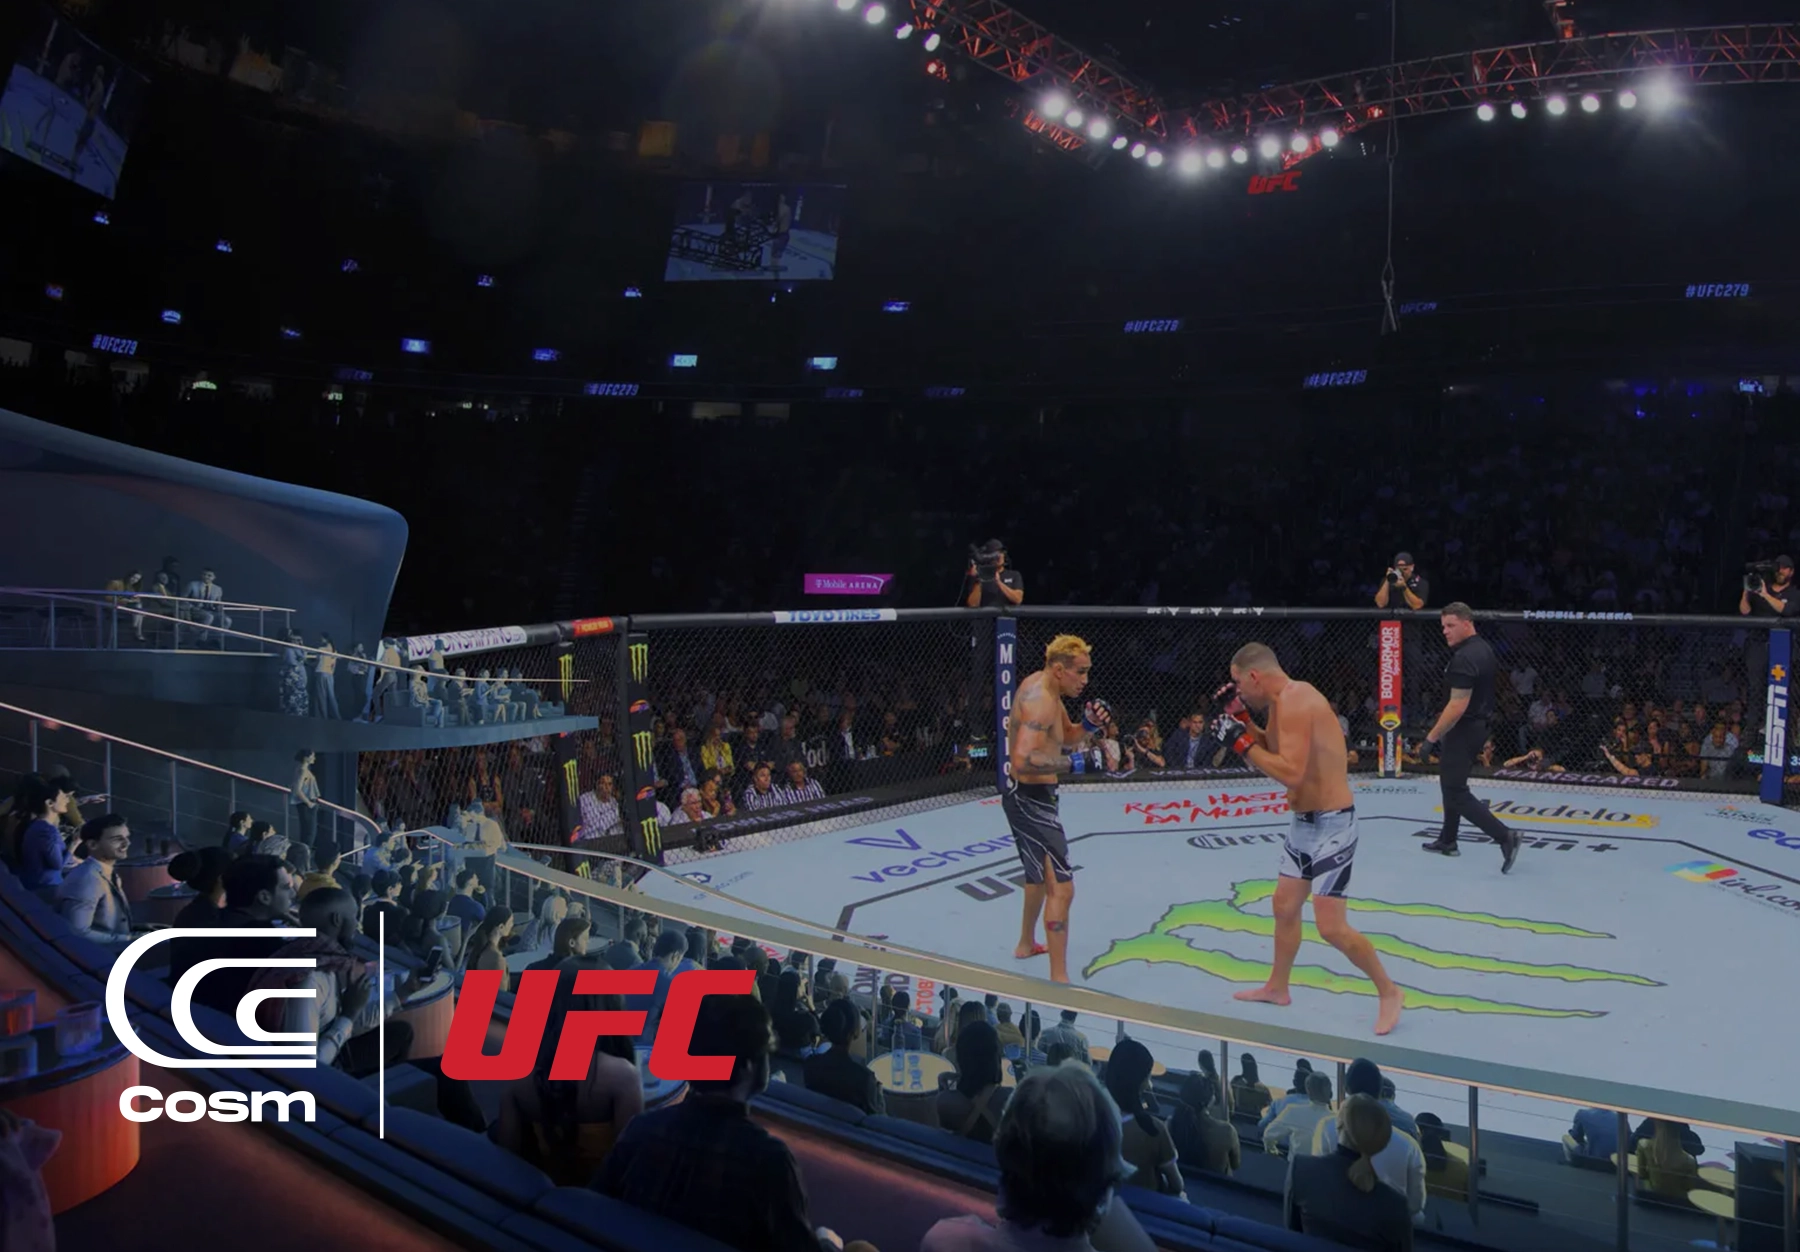 The Dome UFC Rendering